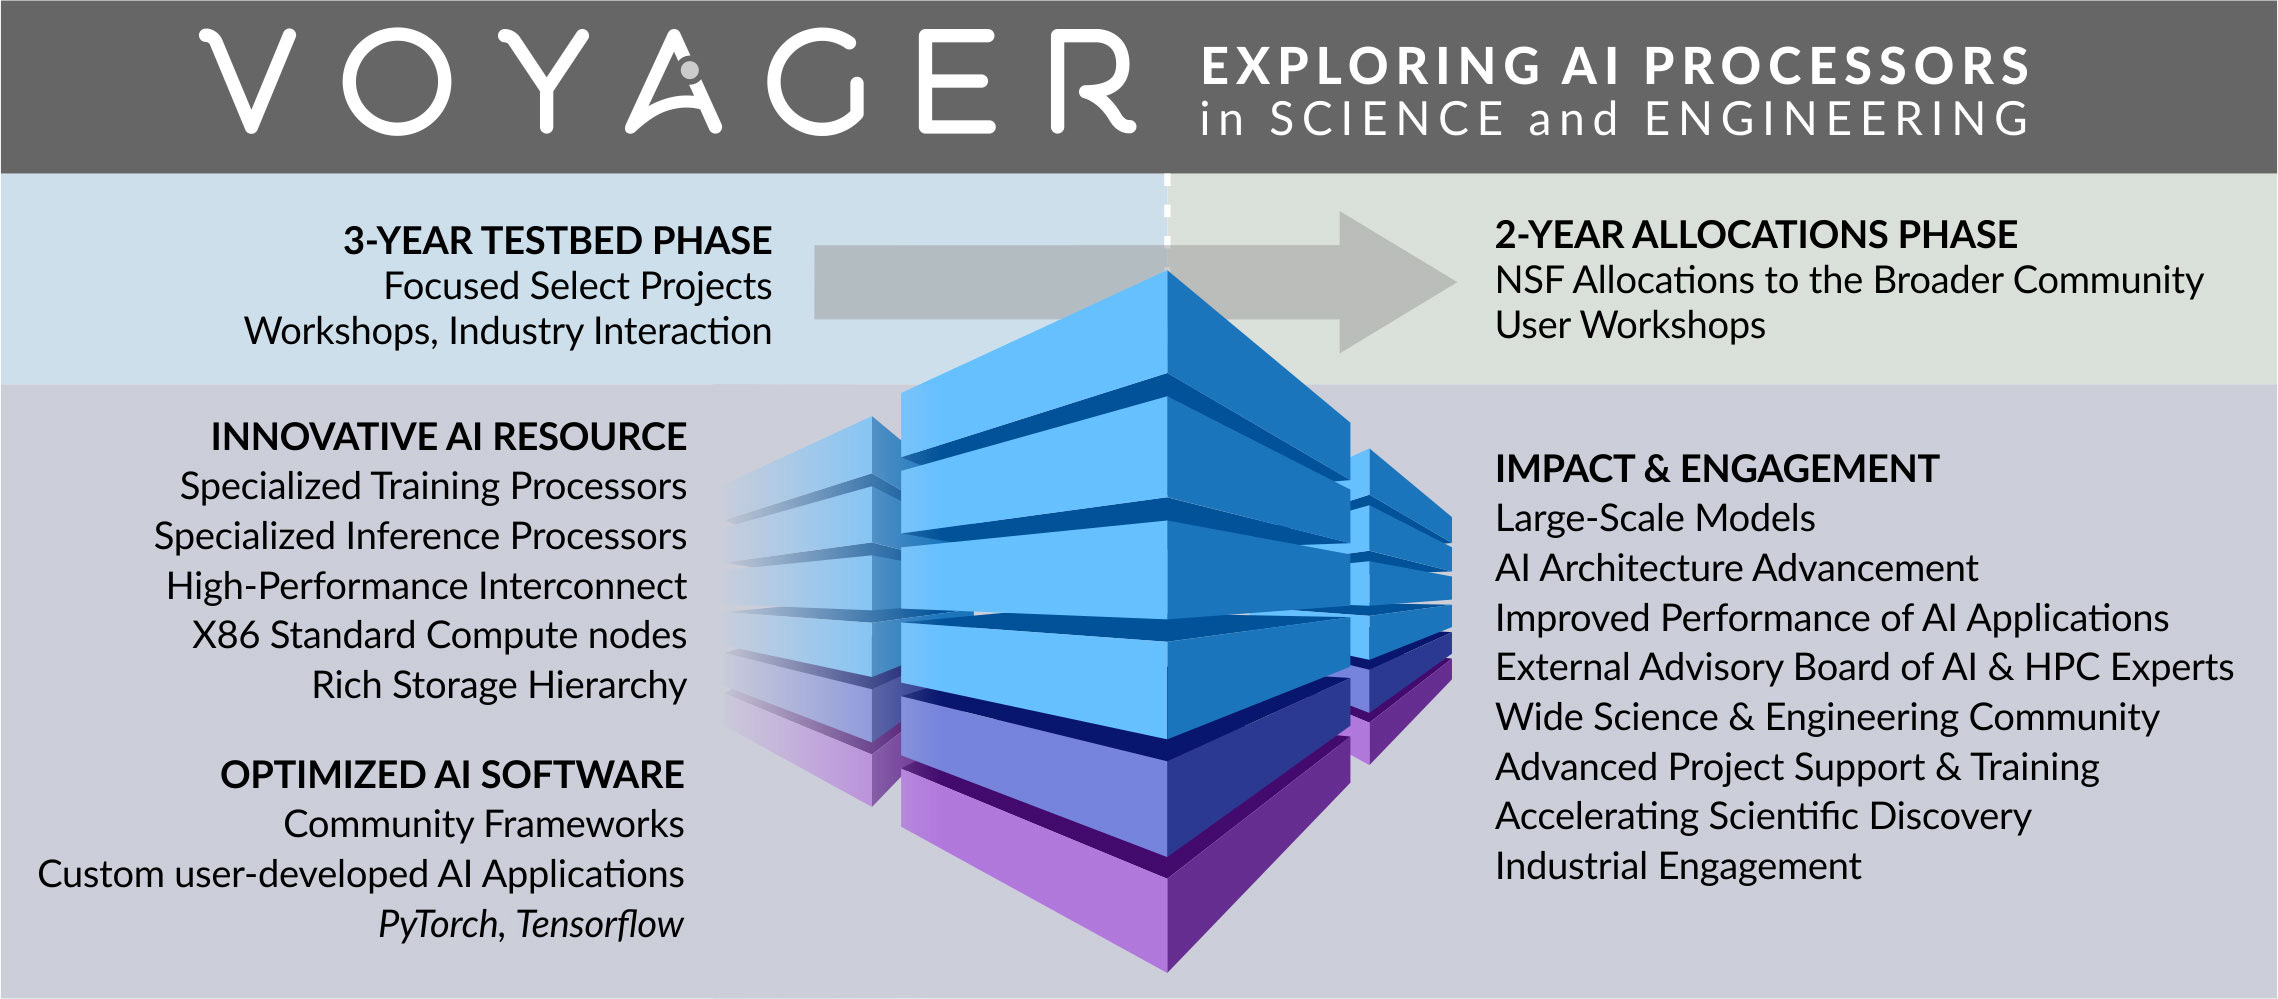 Voyager AI Processors